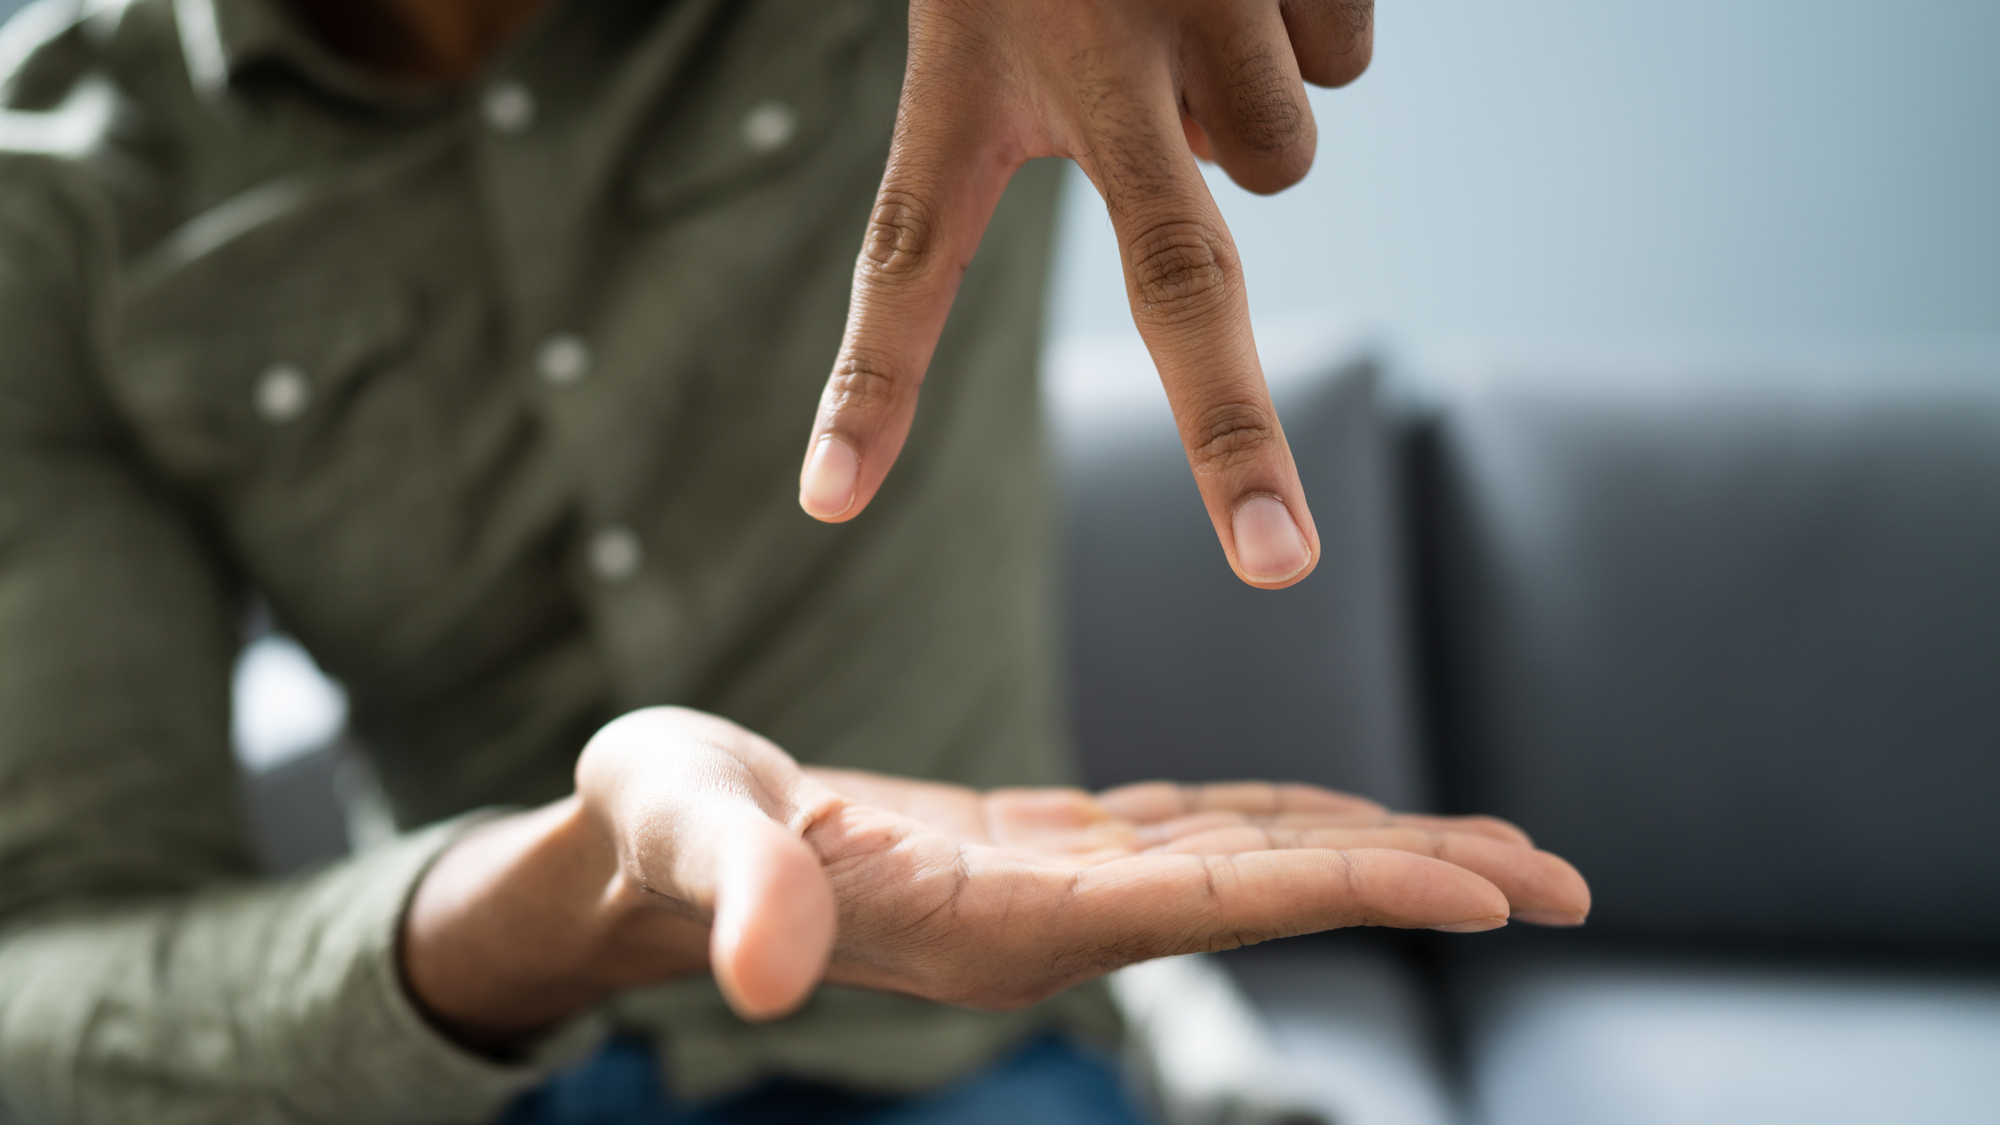 Computer modeling is tracing the hidden evolution of sign languages